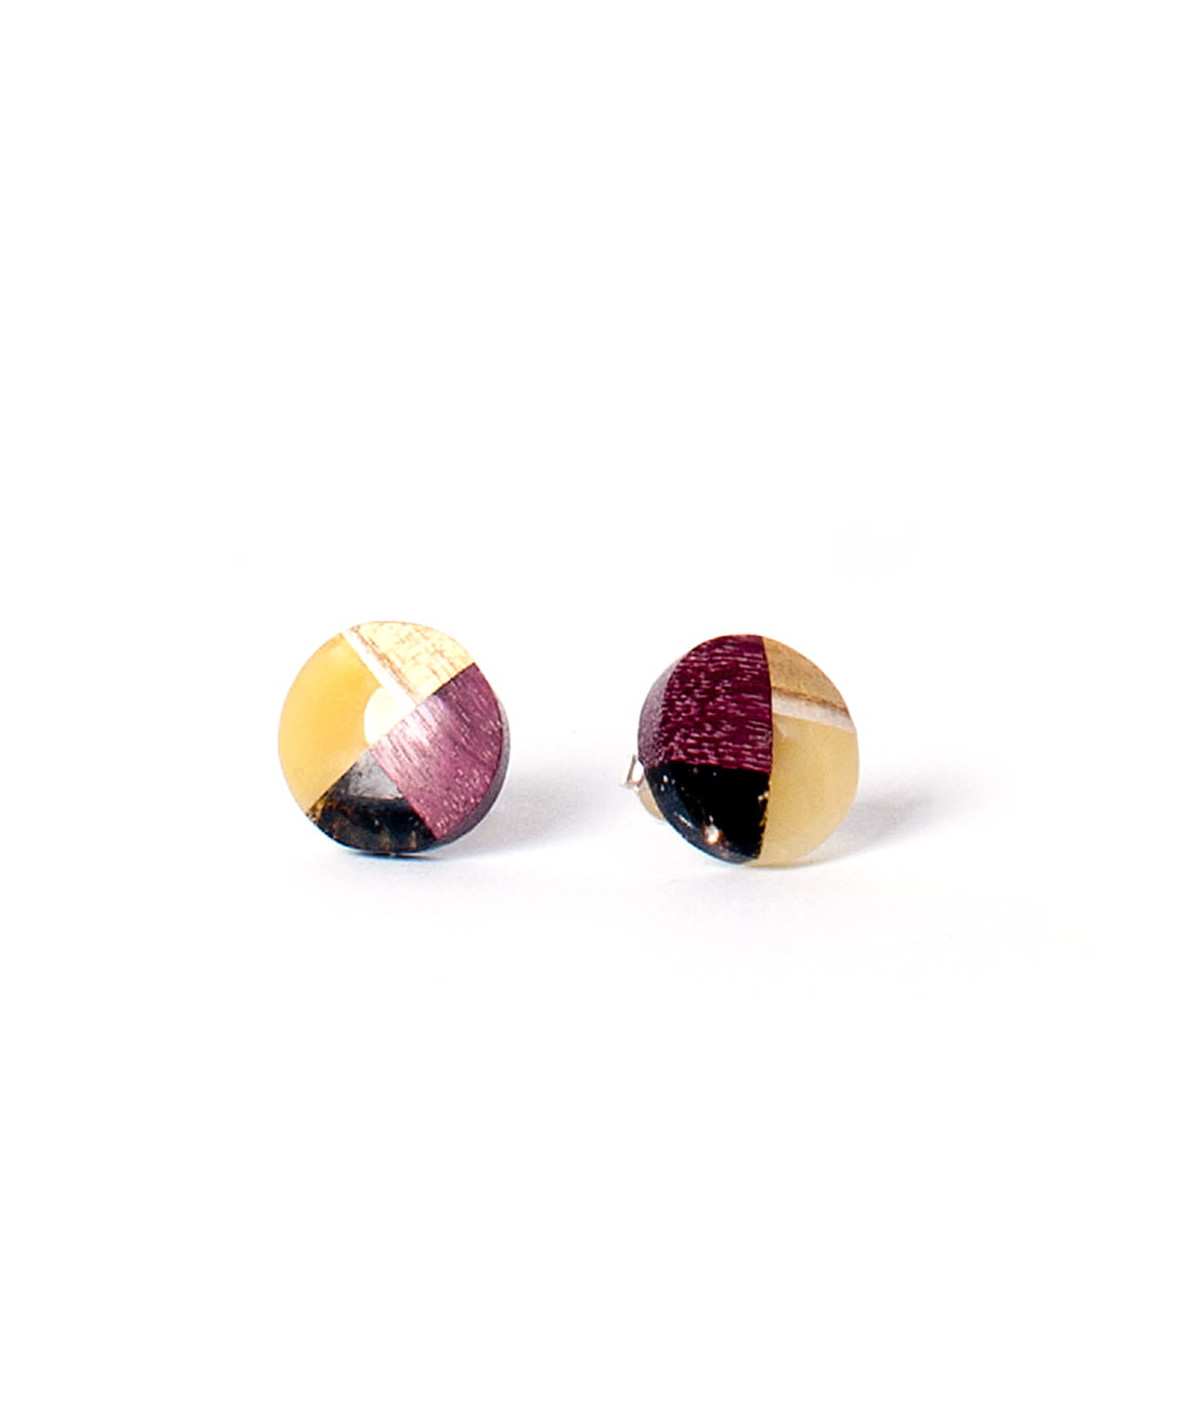 Studs made of amber and wood on silver.